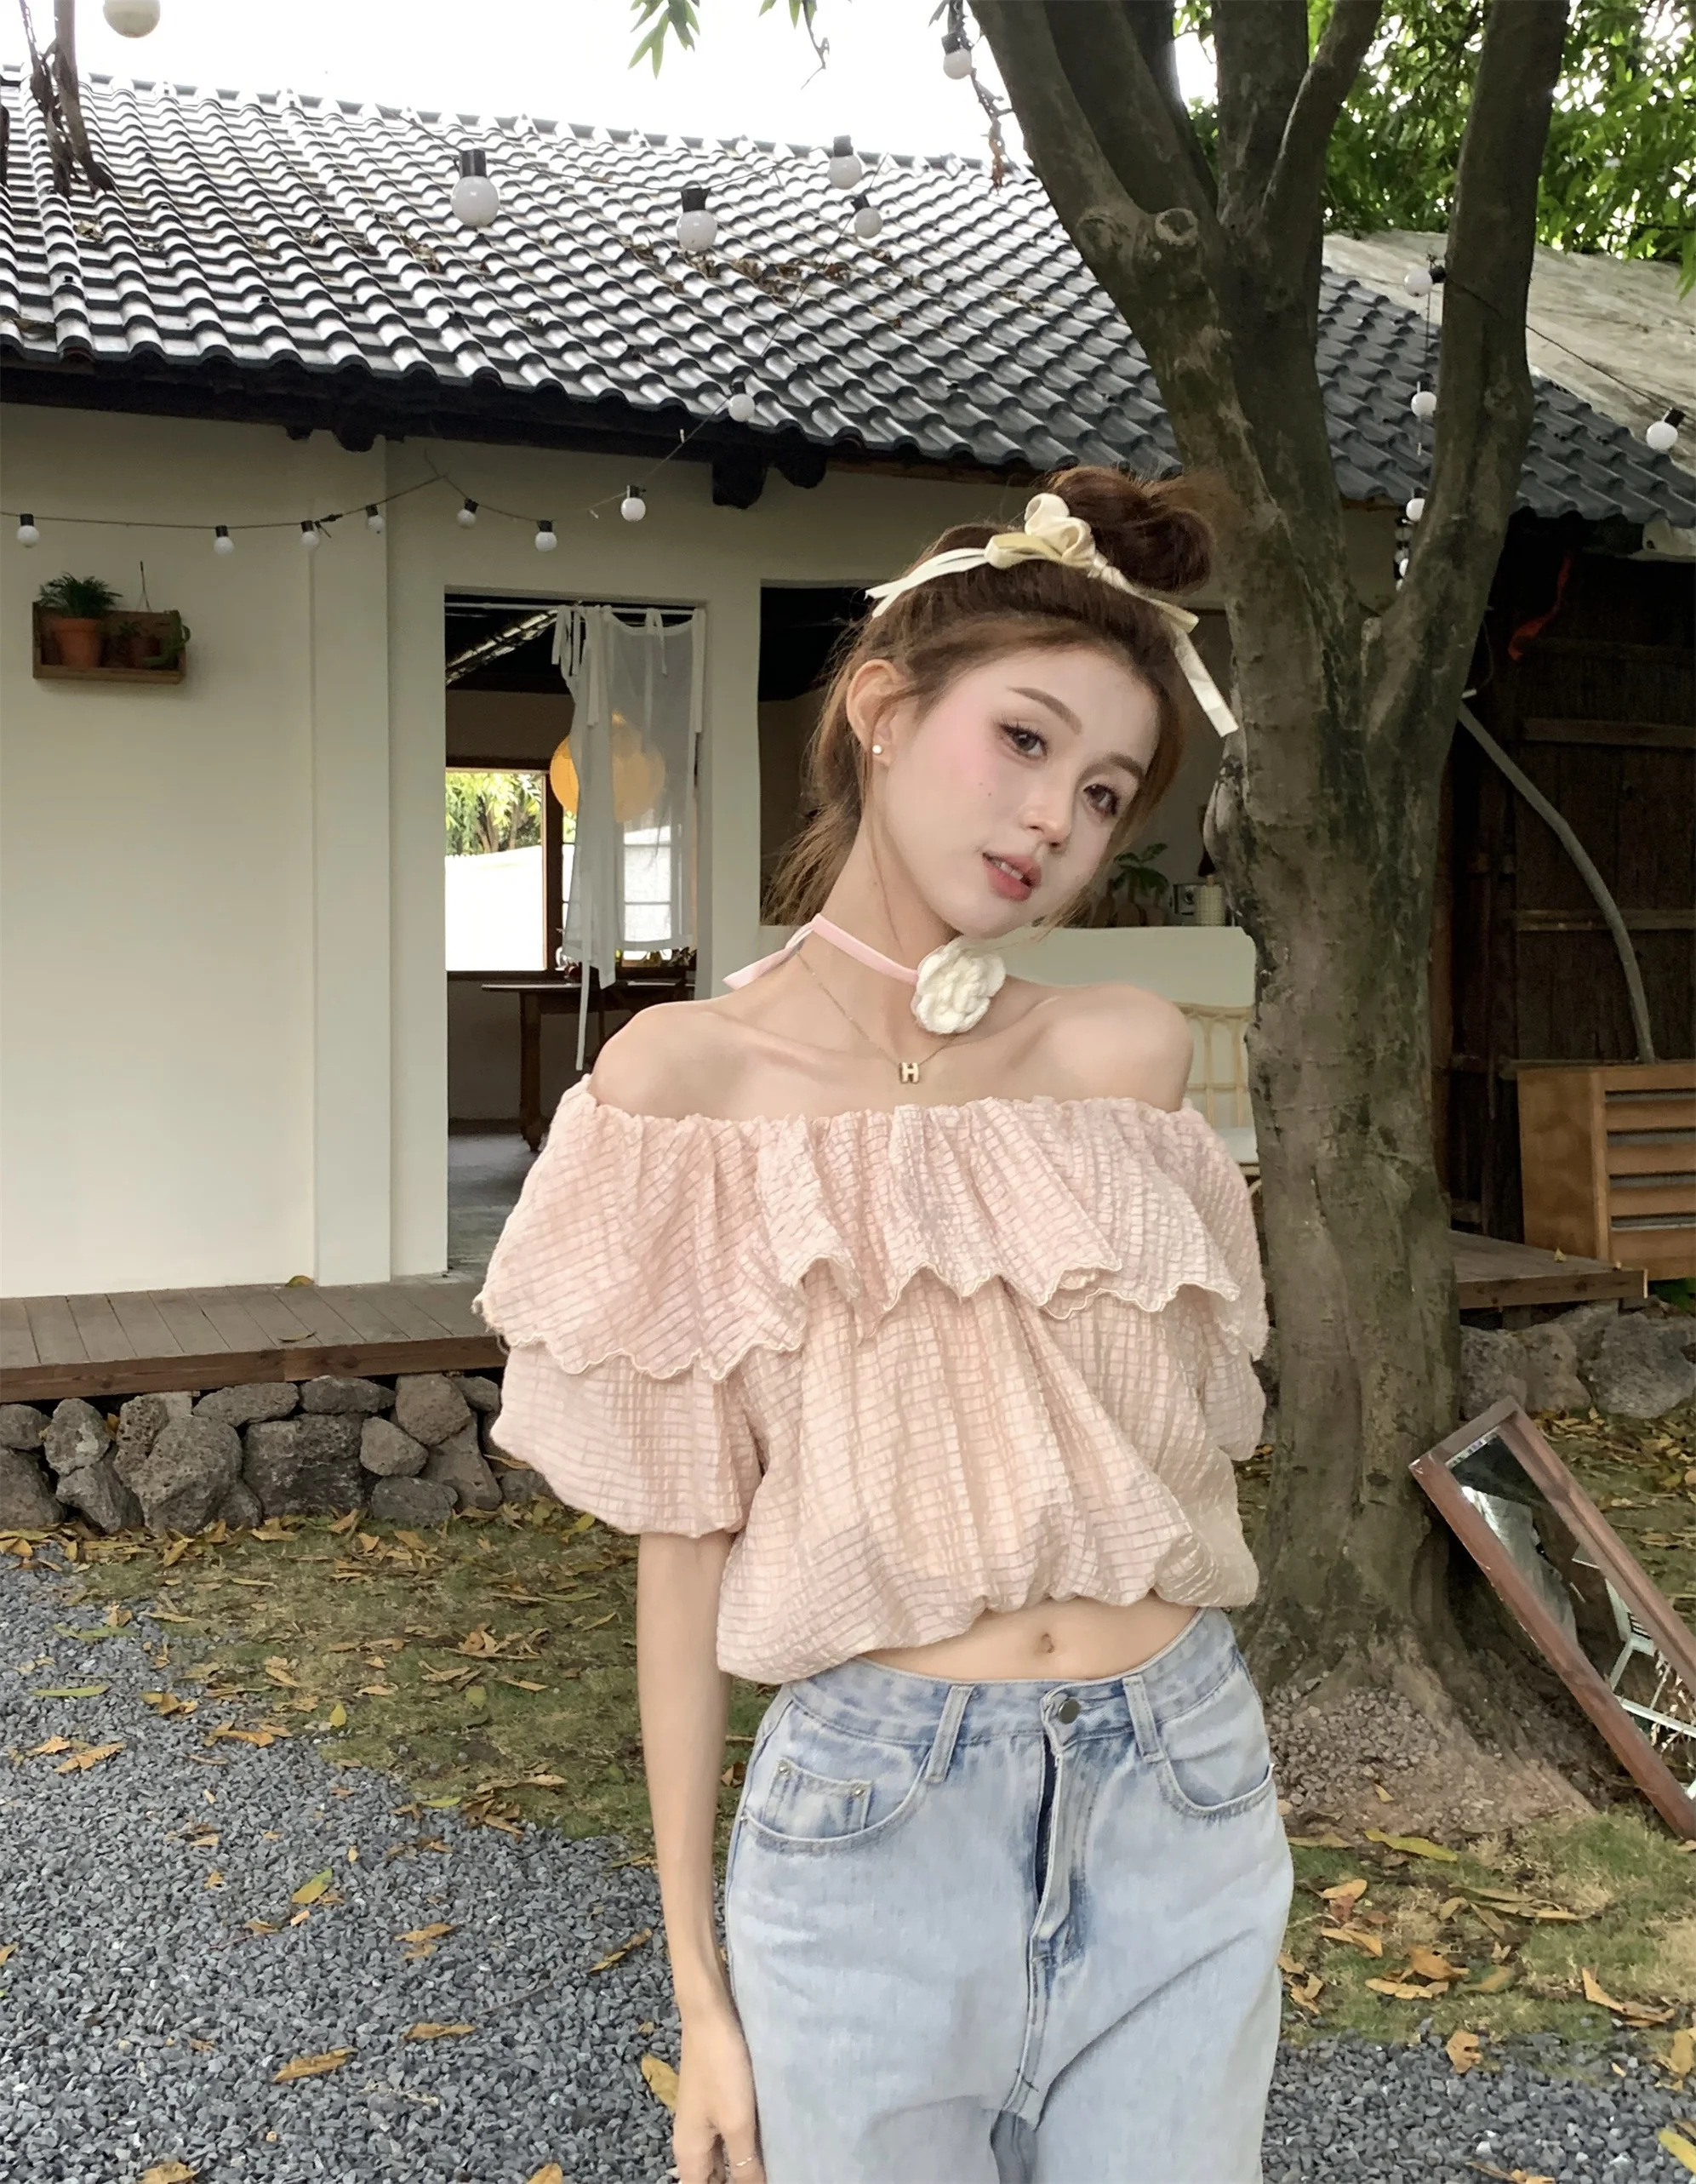 

Women Blouse Shoulder Ruffled Edge Lattice Short Sleeve Sweet French Style Sexy Pretty Chiffon Party for Girls